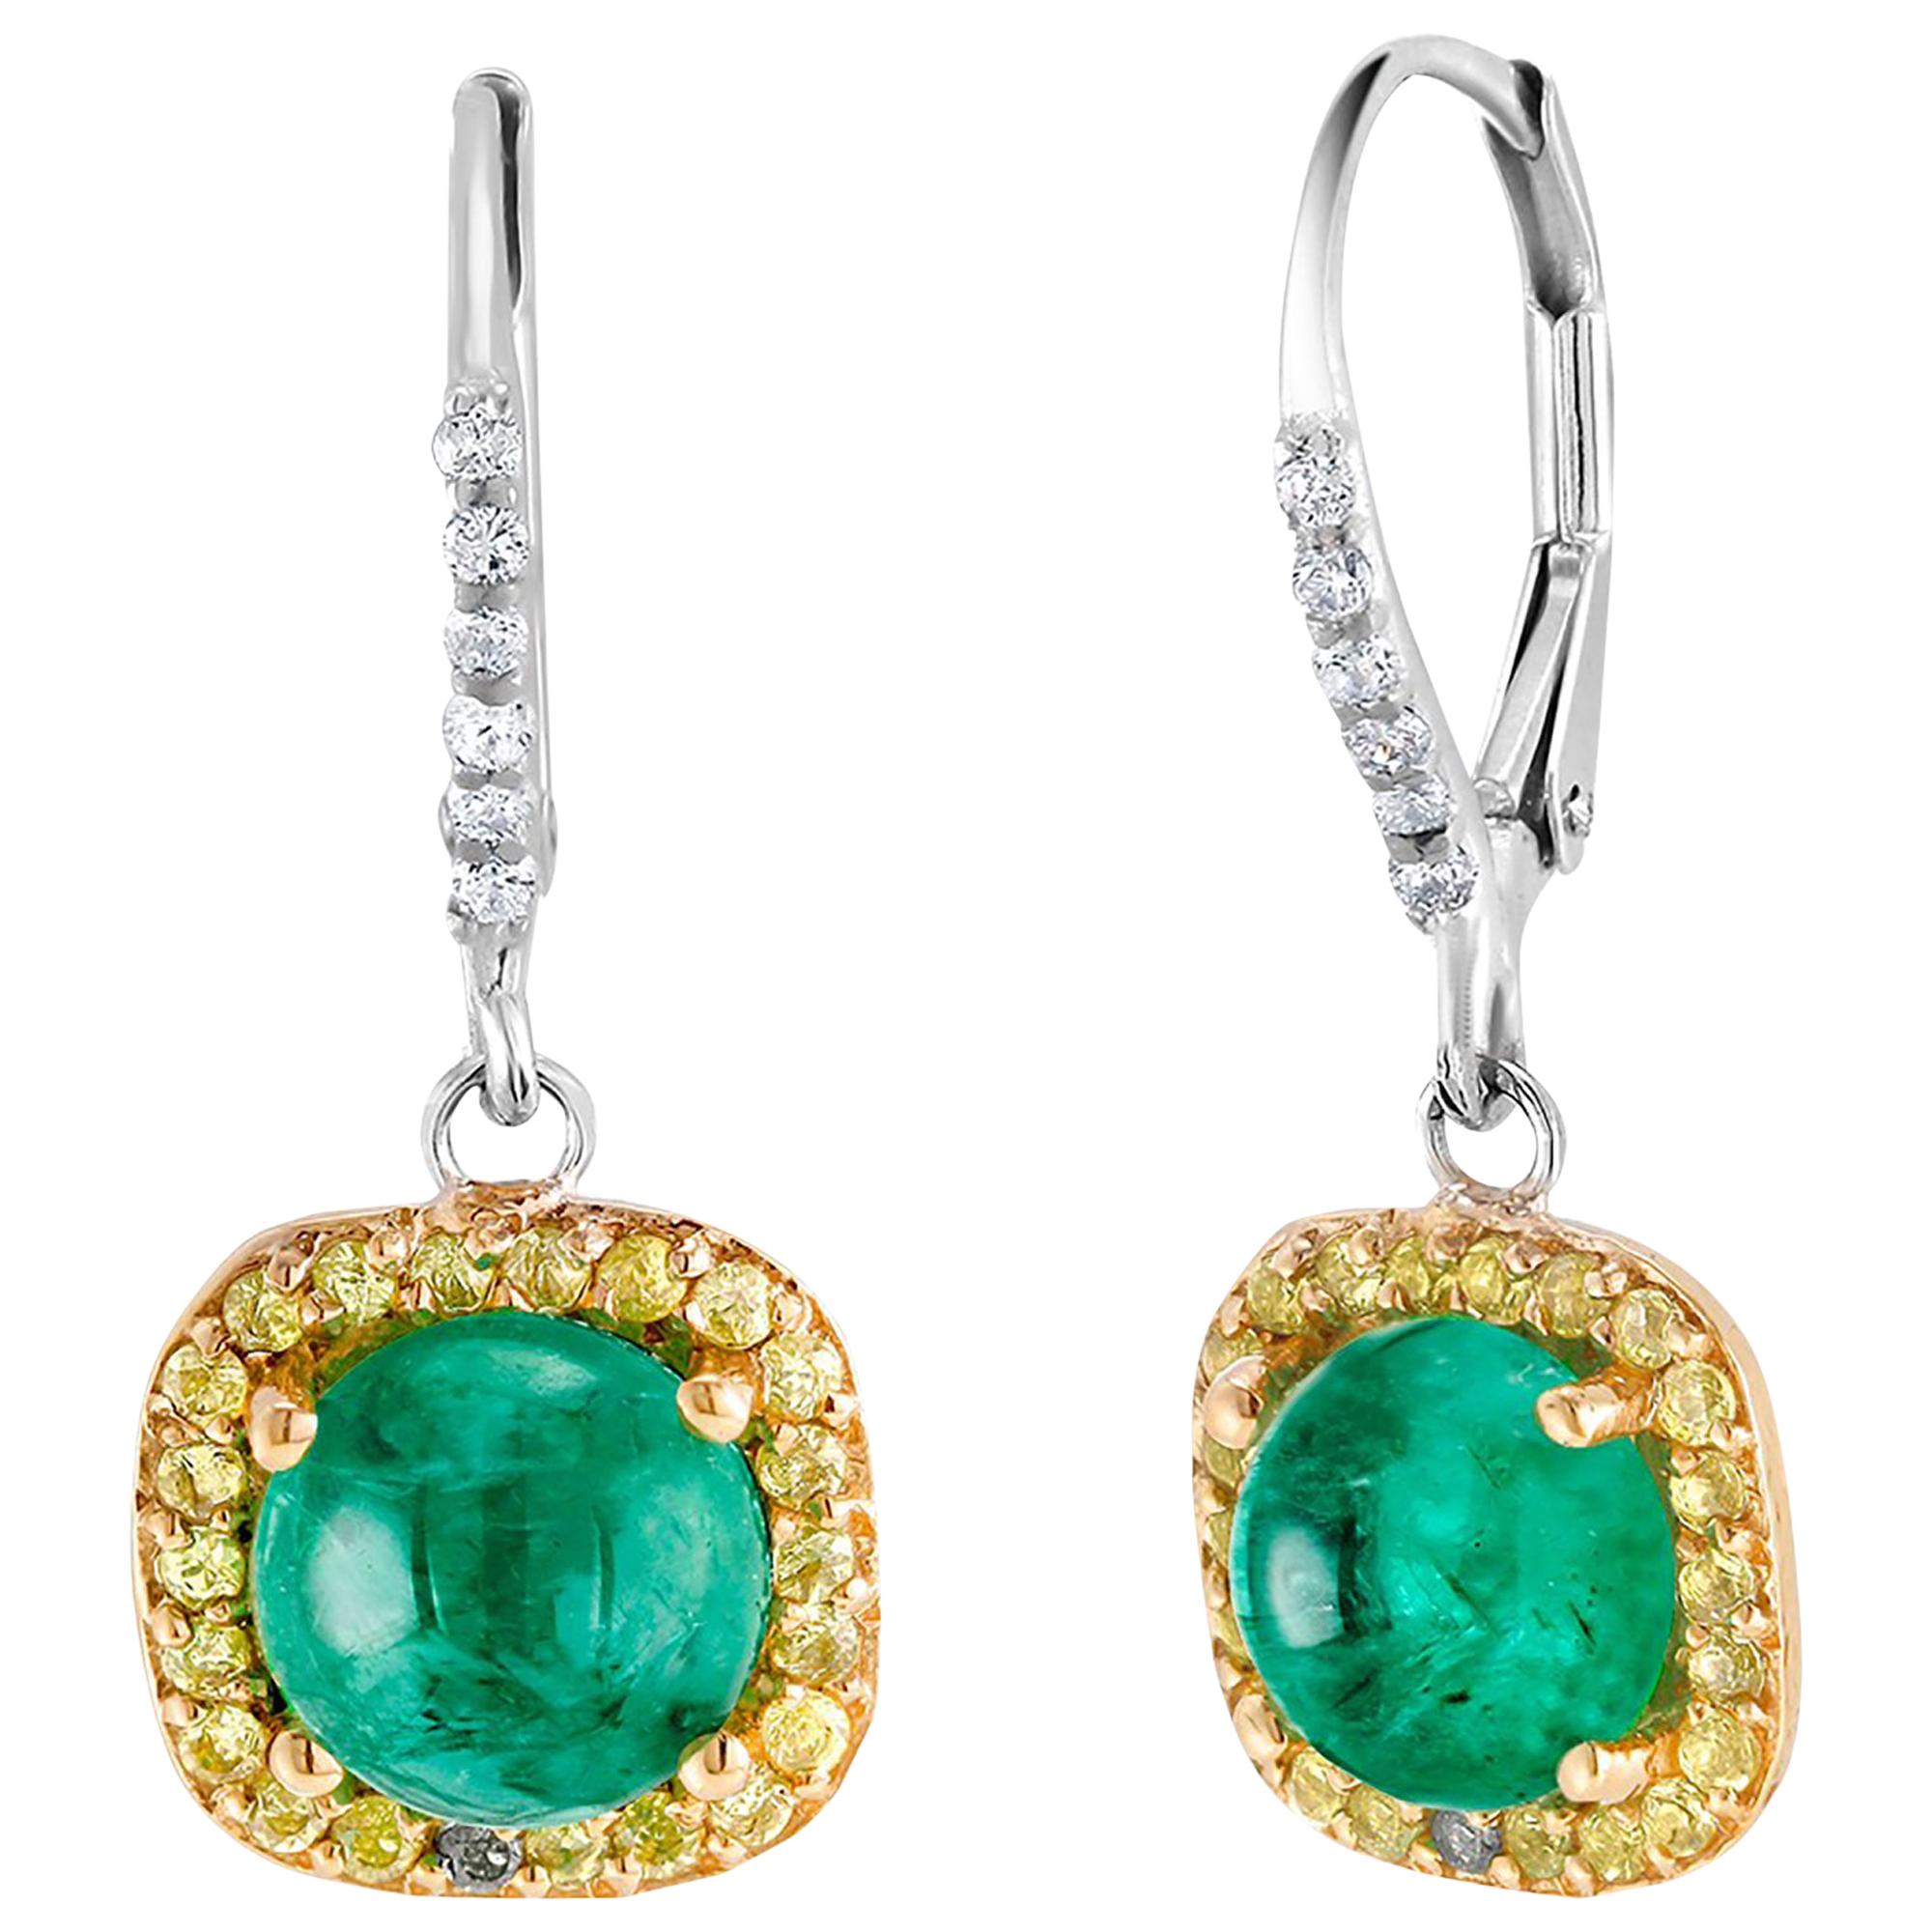 Round Cabochon Emerald and Diamond Drop Hoop Earrings